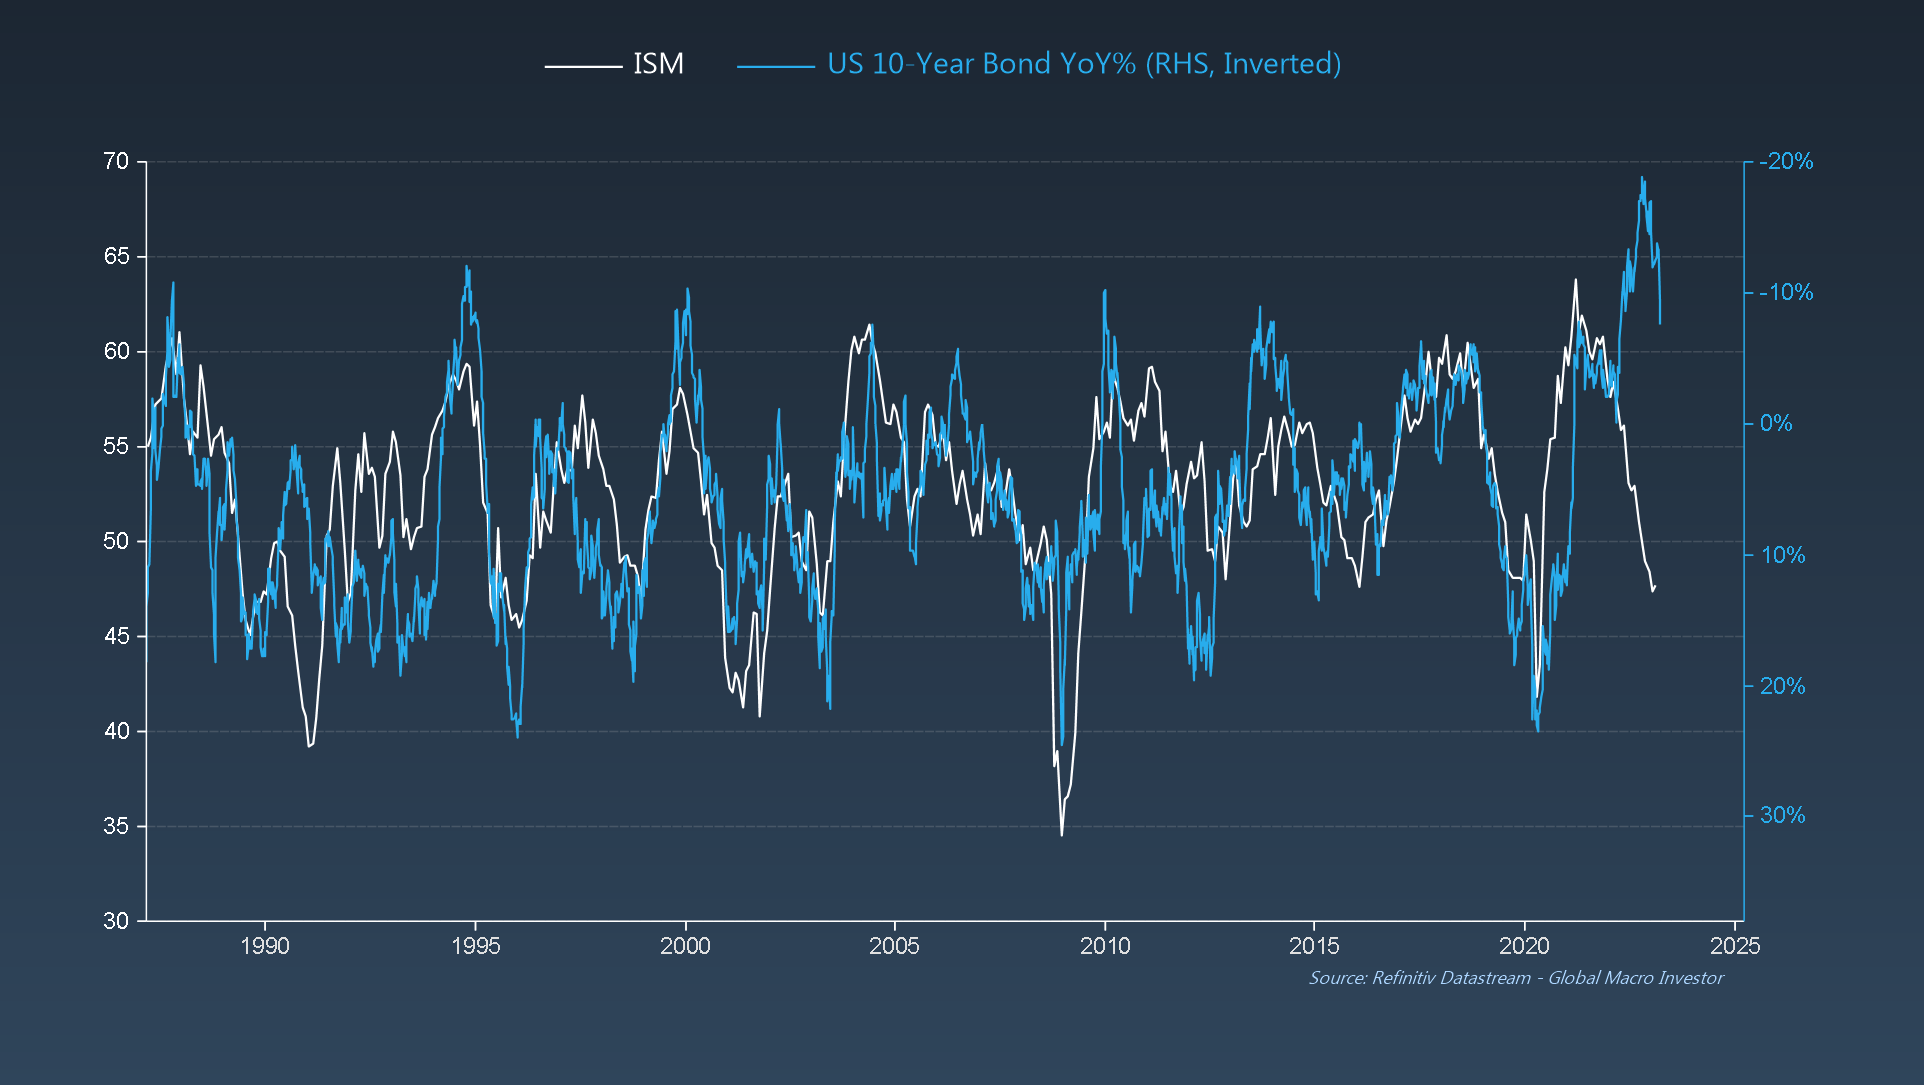 ISM vs. US 10-Year Yield